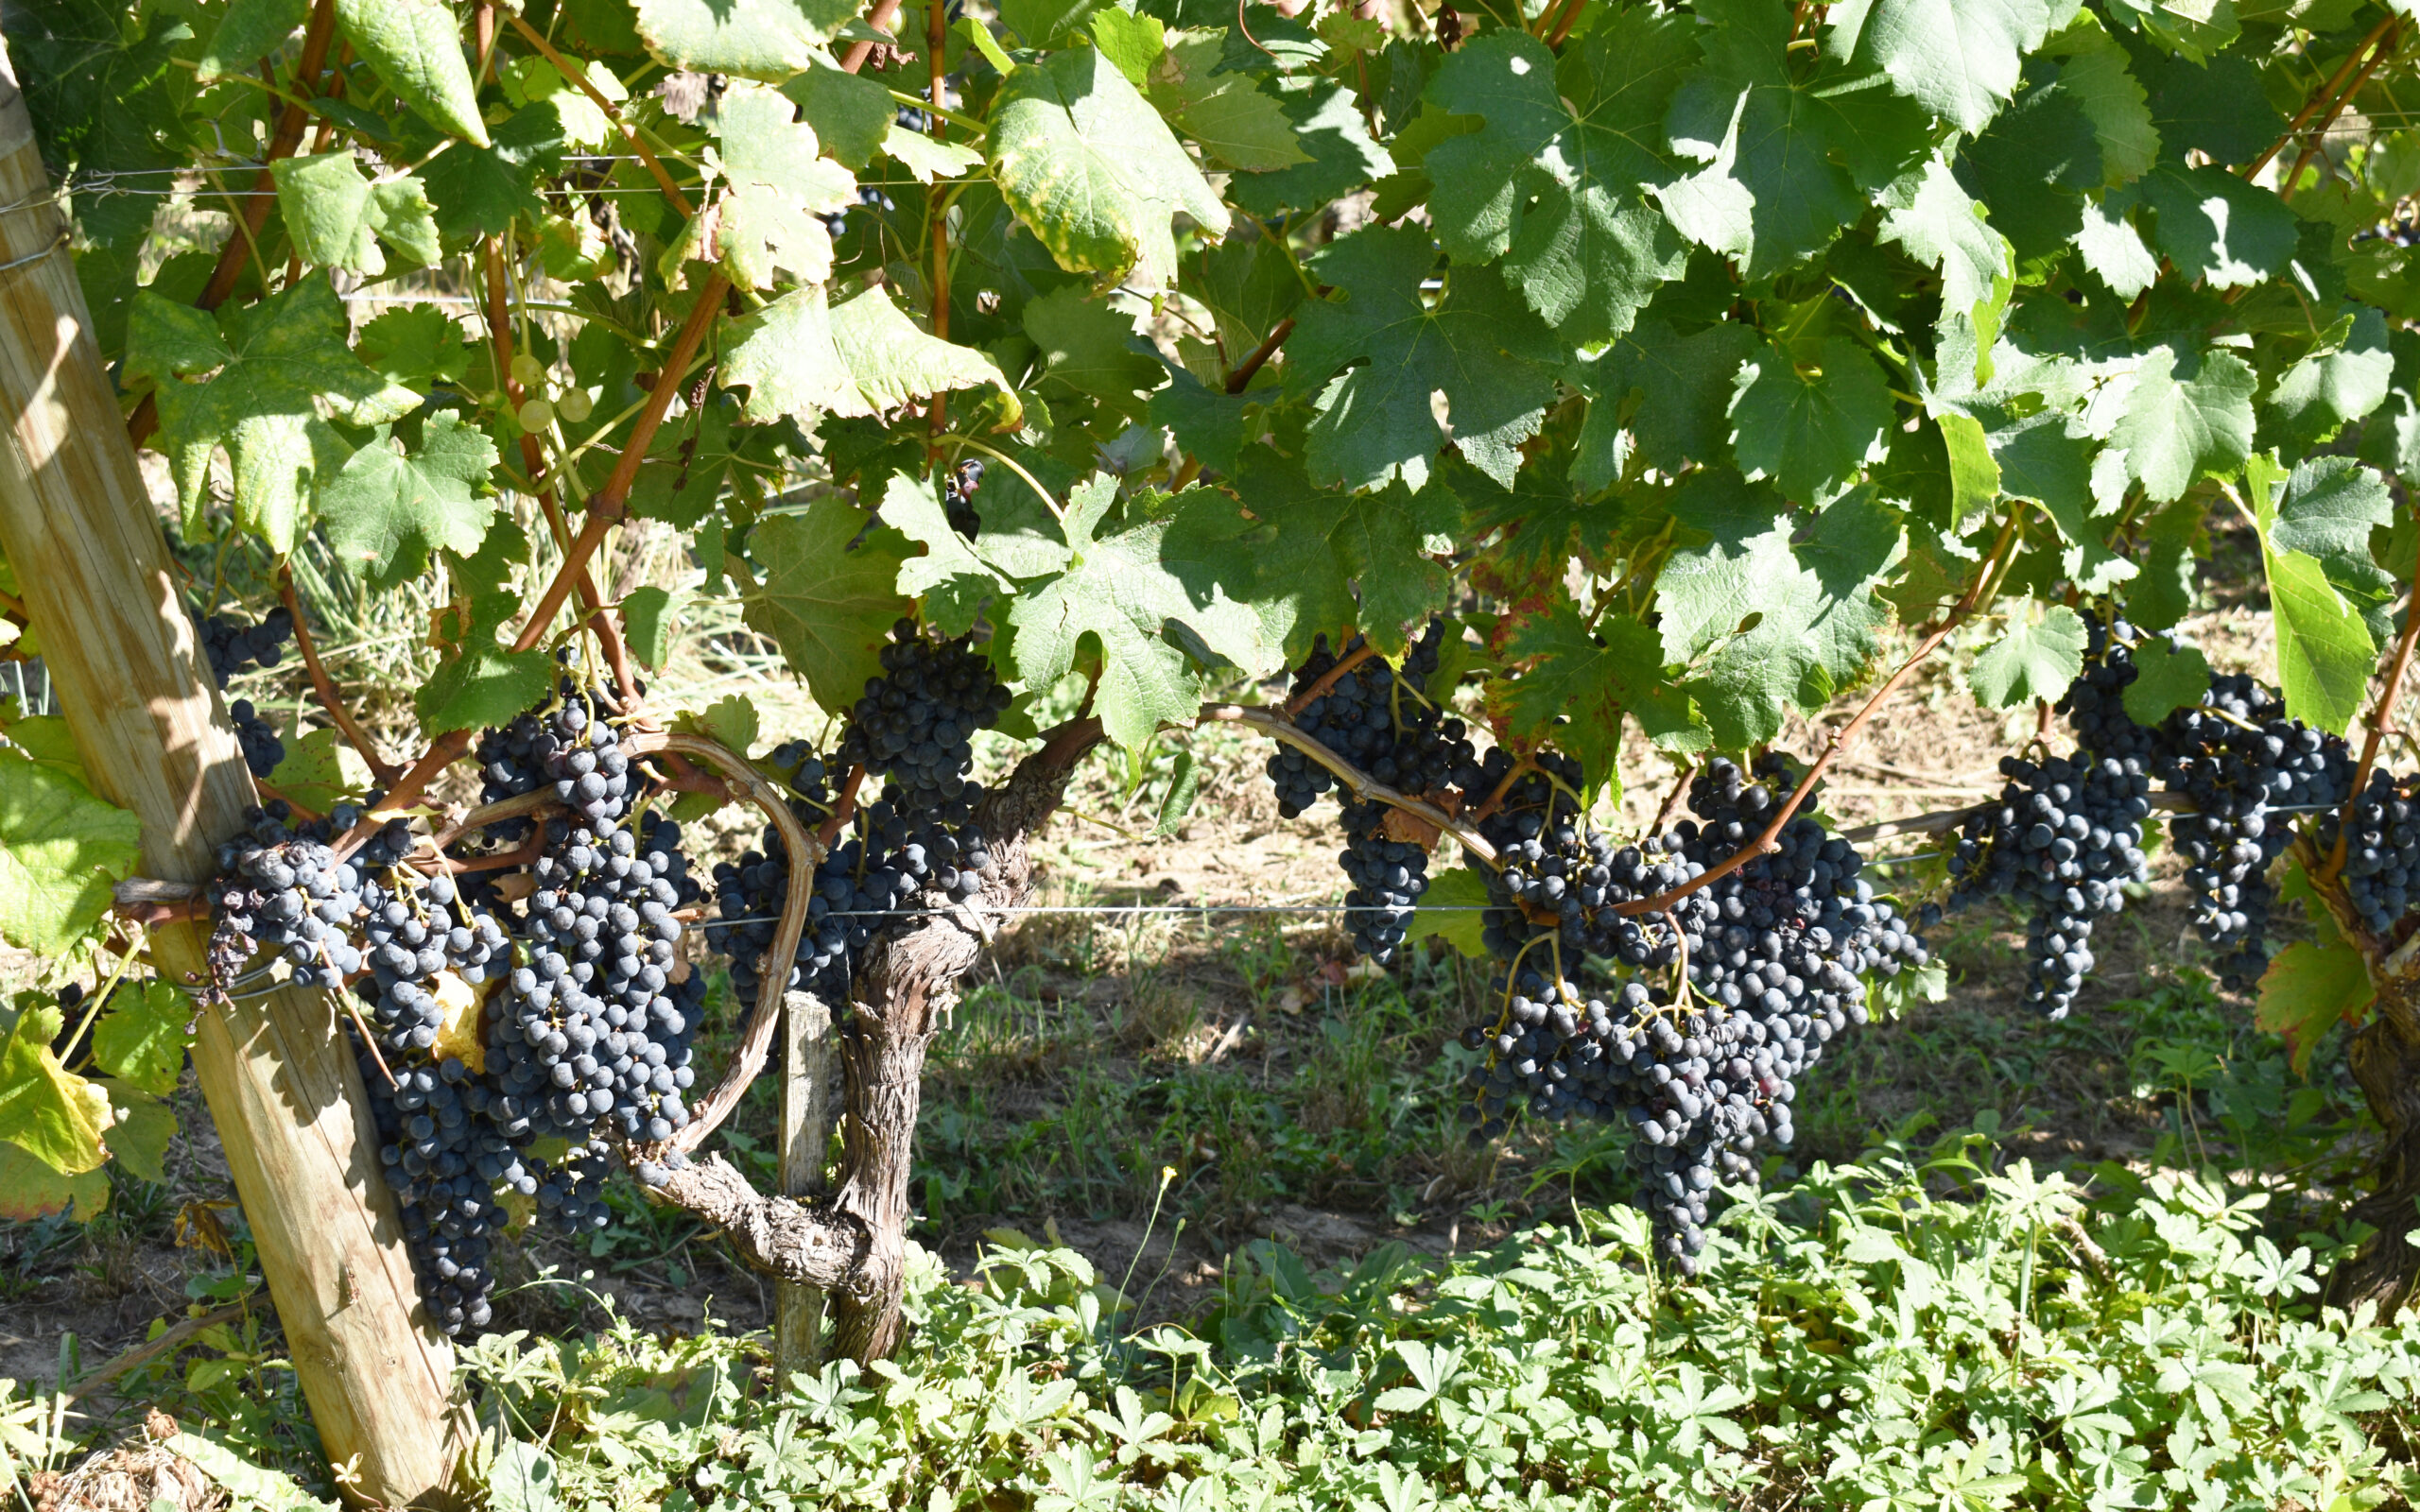 Grapes soon to be harvested